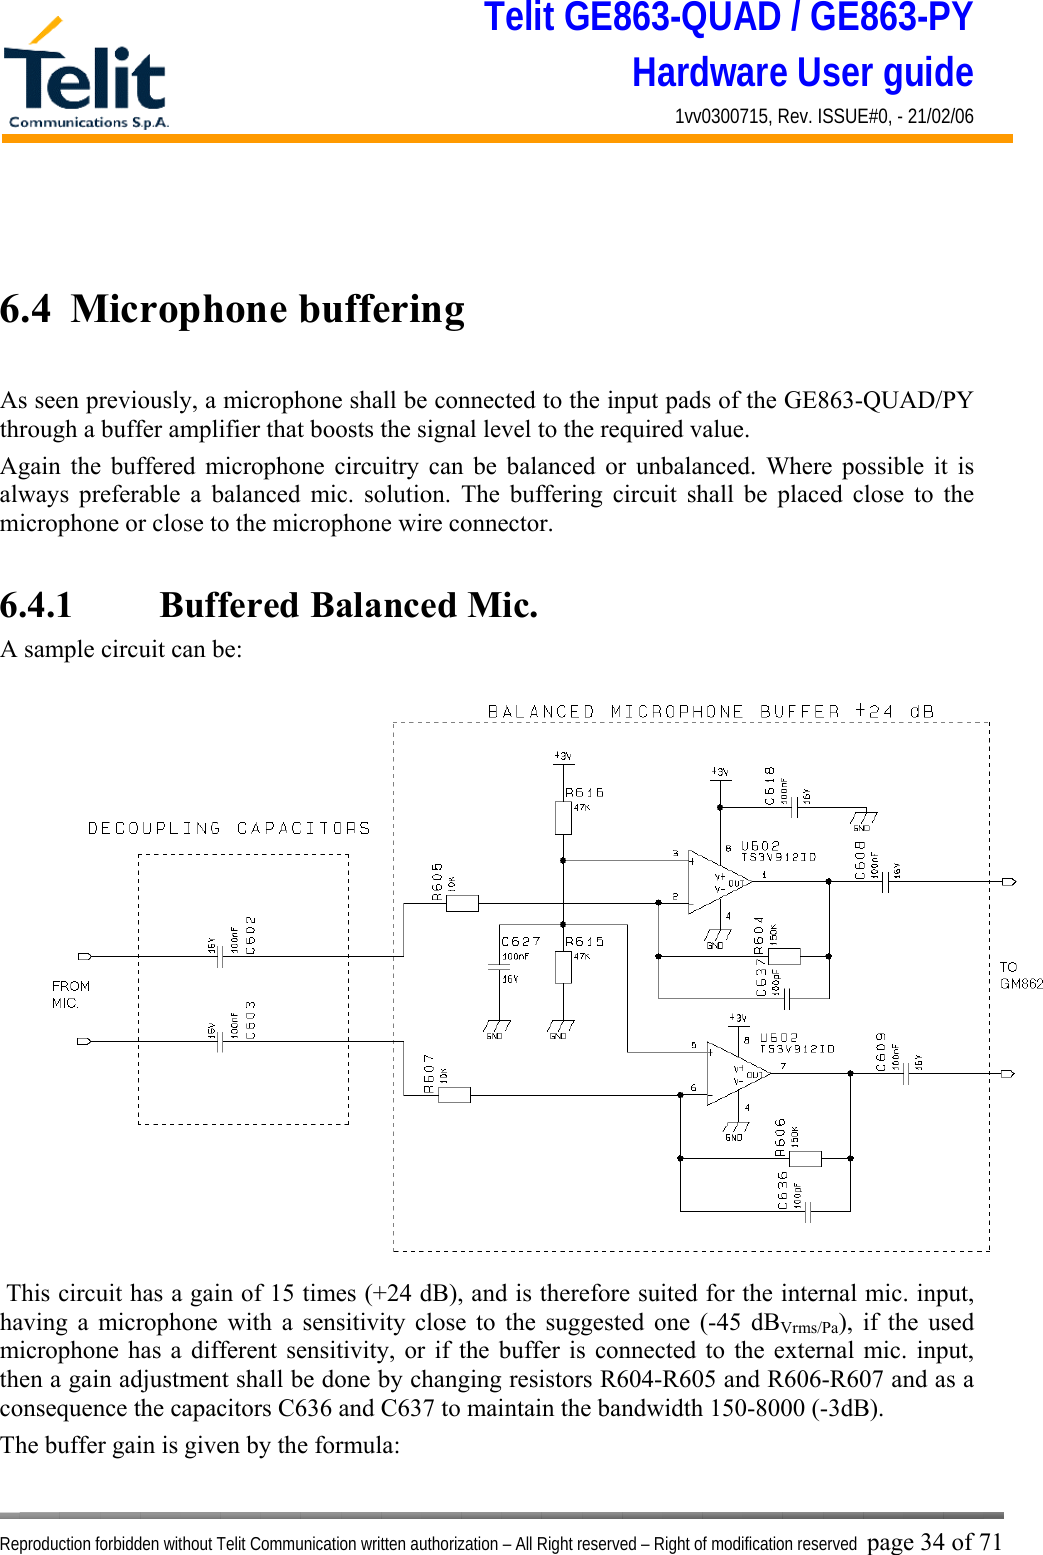 Telit GE863-QUAD / GE863-PY Hardware User guide 1vv0300715, Rev. ISSUE#0, - 21/02/06    Reproduction forbidden without Telit Communication written authorization – All Right reserved – Right of modification reserved page 34 of 71   6.4  Microphone buffering  As seen previously, a microphone shall be connected to the input pads of the GE863-QUAD/PY through a buffer amplifier that boosts the signal level to the required value. Again the buffered microphone circuitry can be balanced or unbalanced. Where possible it is always preferable a balanced mic. solution. The buffering circuit shall be placed close to the microphone or close to the microphone wire connector.  6.4.1    Buffered Balanced Mic. A sample circuit can be:  This circuit has a gain of 15 times (+24 dB), and is therefore suited for the internal mic. input, having a microphone with a sensitivity close to the suggested one (-45 dBVrms/Pa), if the used microphone has a different sensitivity, or if the buffer is connected to the external mic. input, then a gain adjustment shall be done by changing resistors R604-R605 and R606-R607 and as a consequence the capacitors C636 and C637 to maintain the bandwidth 150-8000 (-3dB). The buffer gain is given by the formula: 